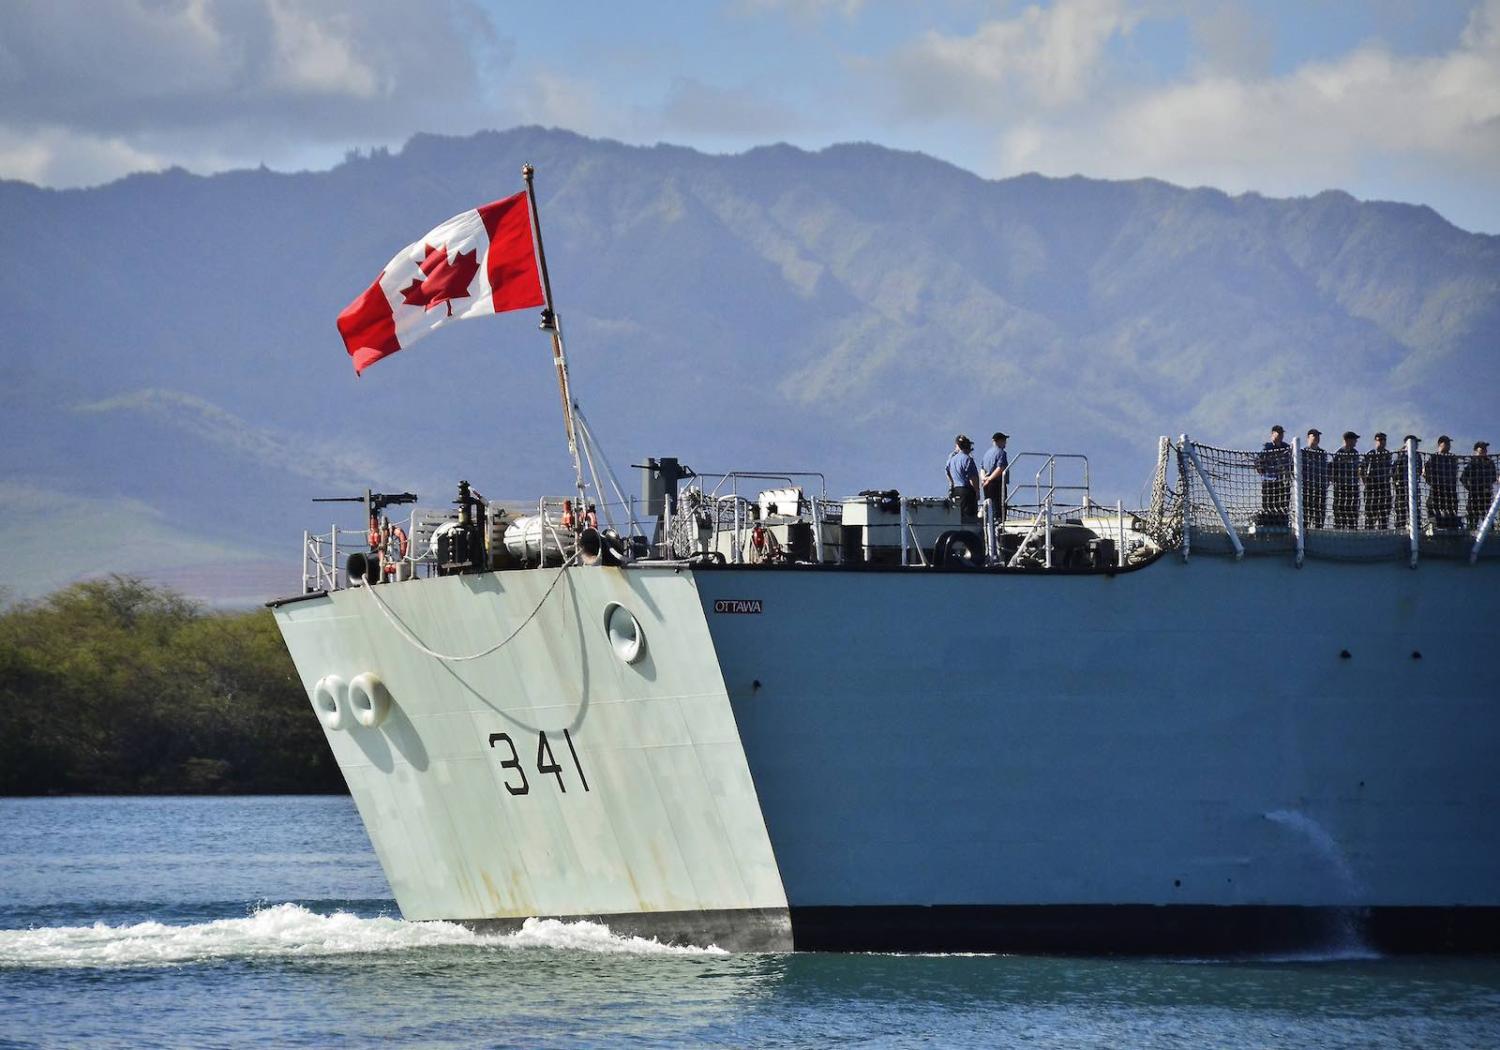 HMCS Ottawa during drills in the Pacific ocean (Photo: US Pacific Fleet/Flickr)